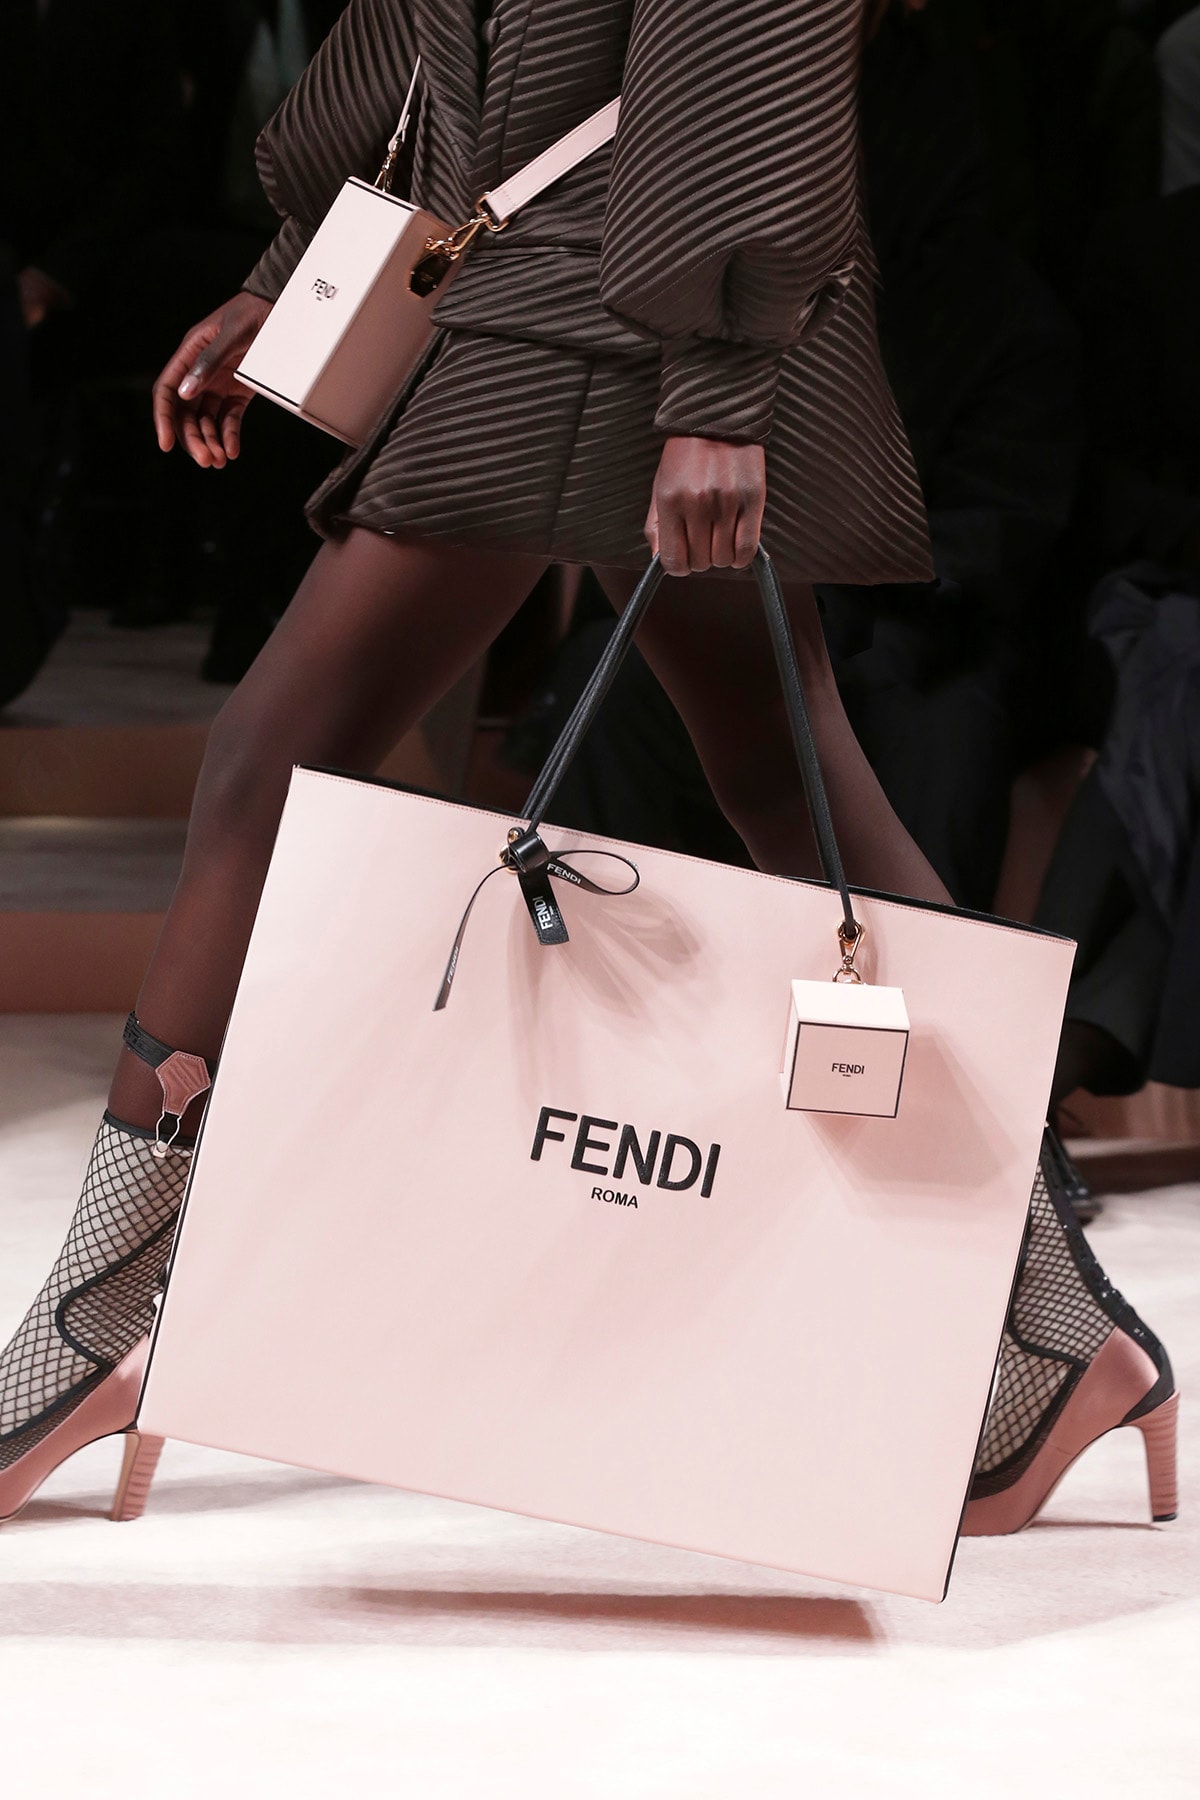 Fendi Fall/Winter 2020 Collection Bags Accessories Shopping Bag Box